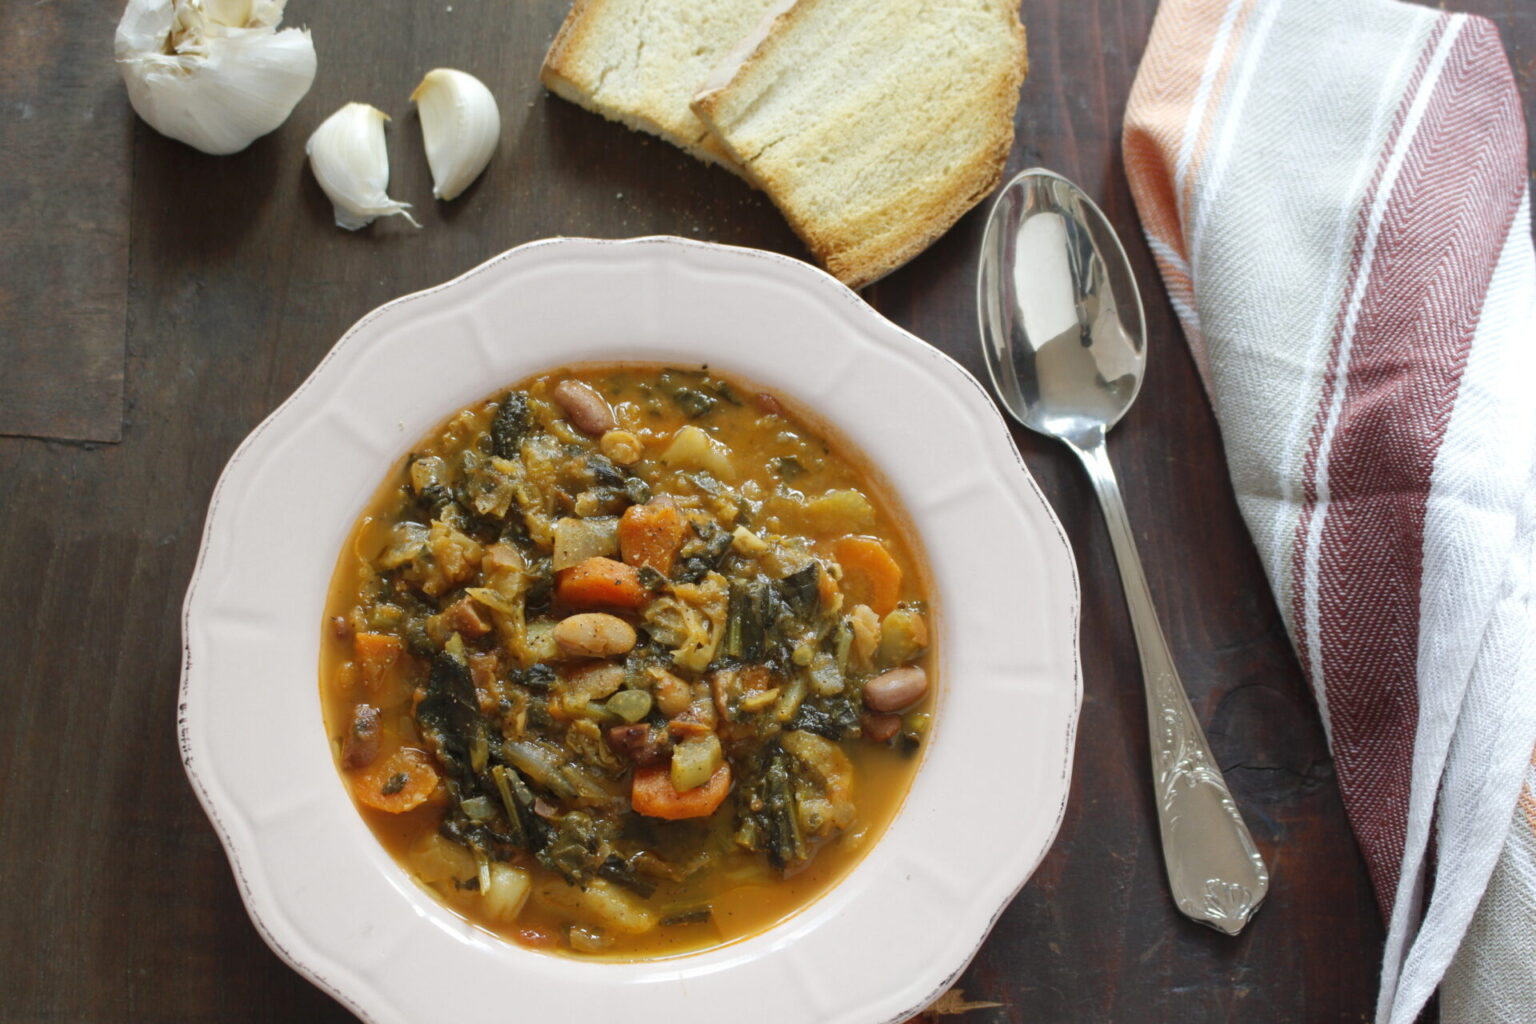 Ribollita a healthy Italian soup beloning to the Tuscan cuisine